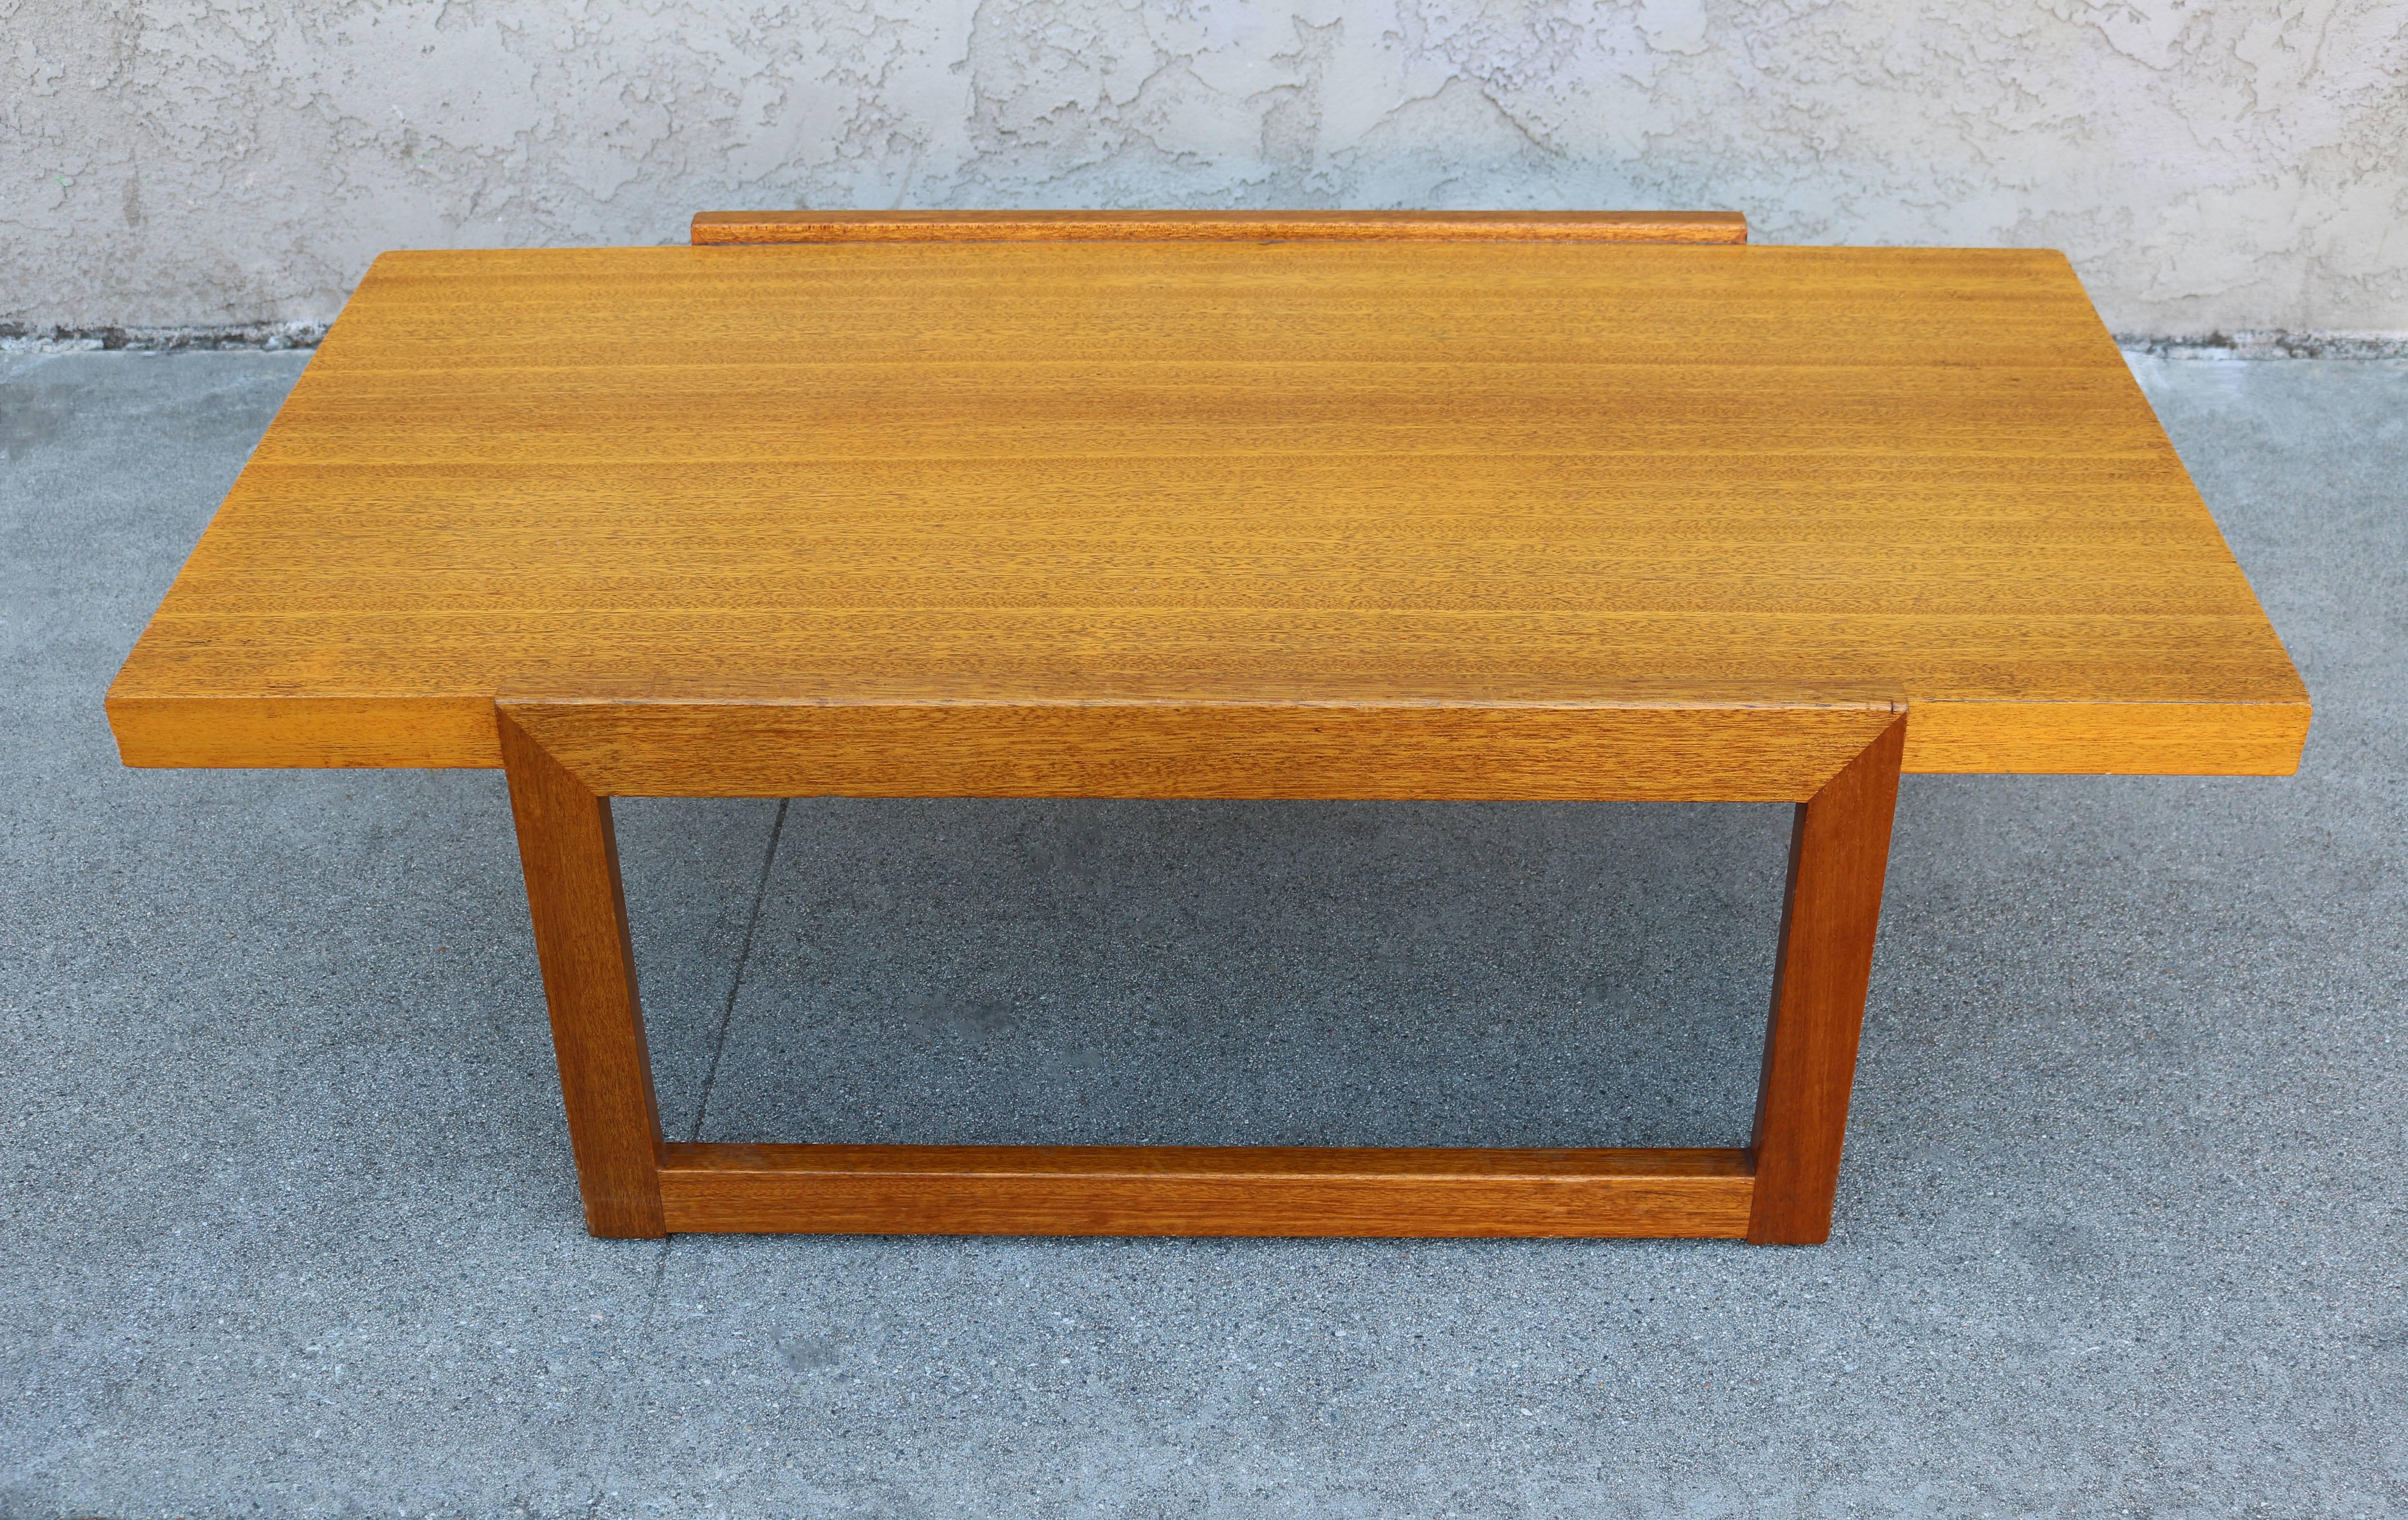 This wooden cocktail or coffee table was designed by the Hungarian modernist architect and designer Paul Laszlo. This piece has Laszlo's signature on underside.